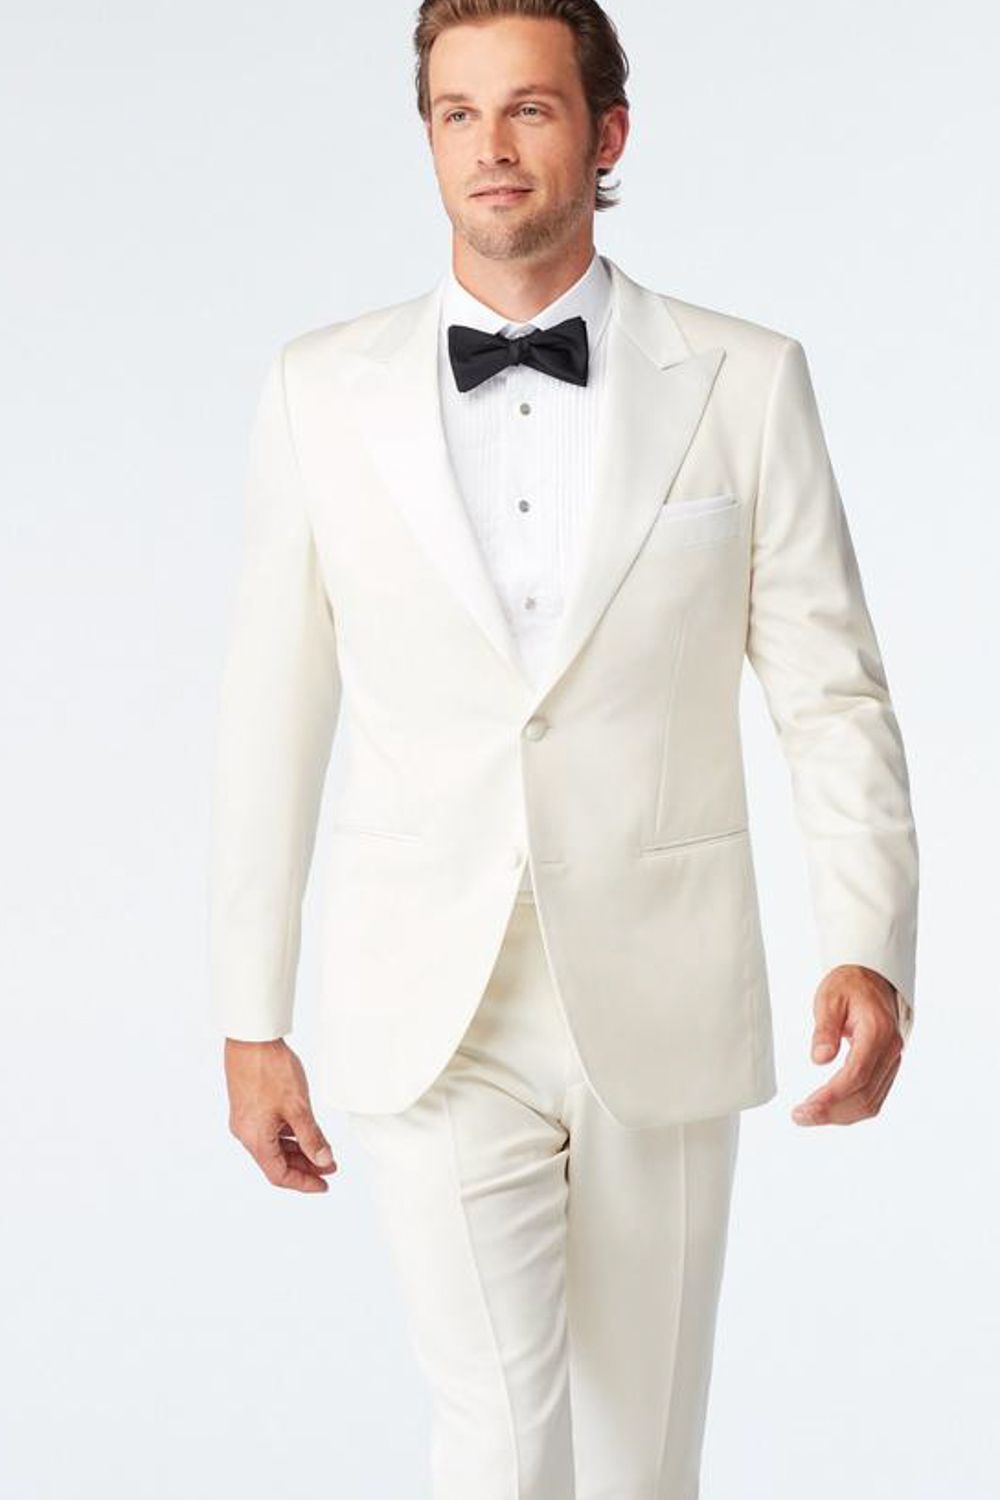 How And When To Wear A White Tuxedo - The Glasgow Telegraph